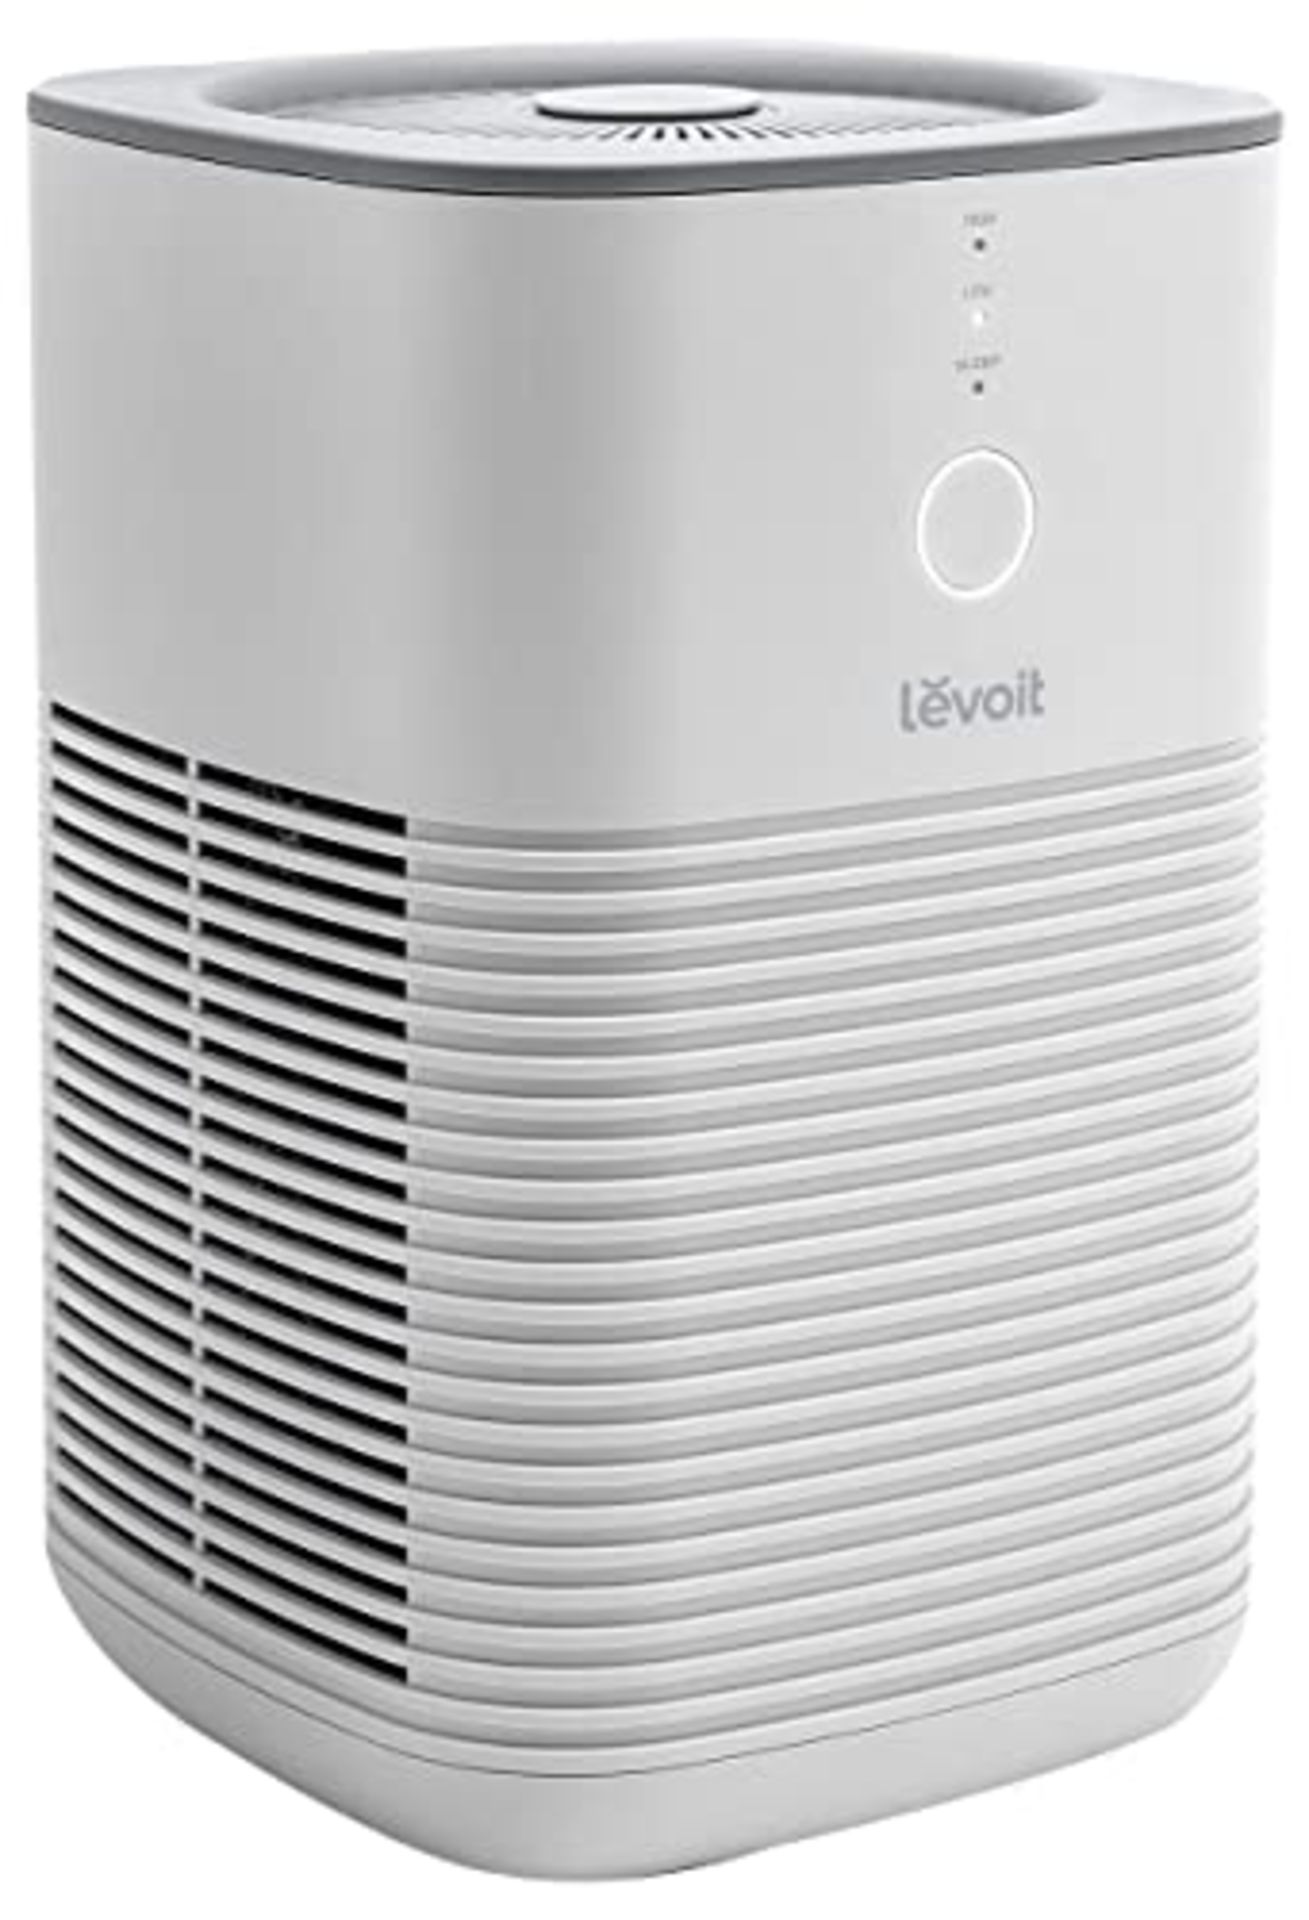 LEVOIT Air Purifier for Home Bedroom, Dual H13 HEPA Filters with Aromatherapy Diffuser